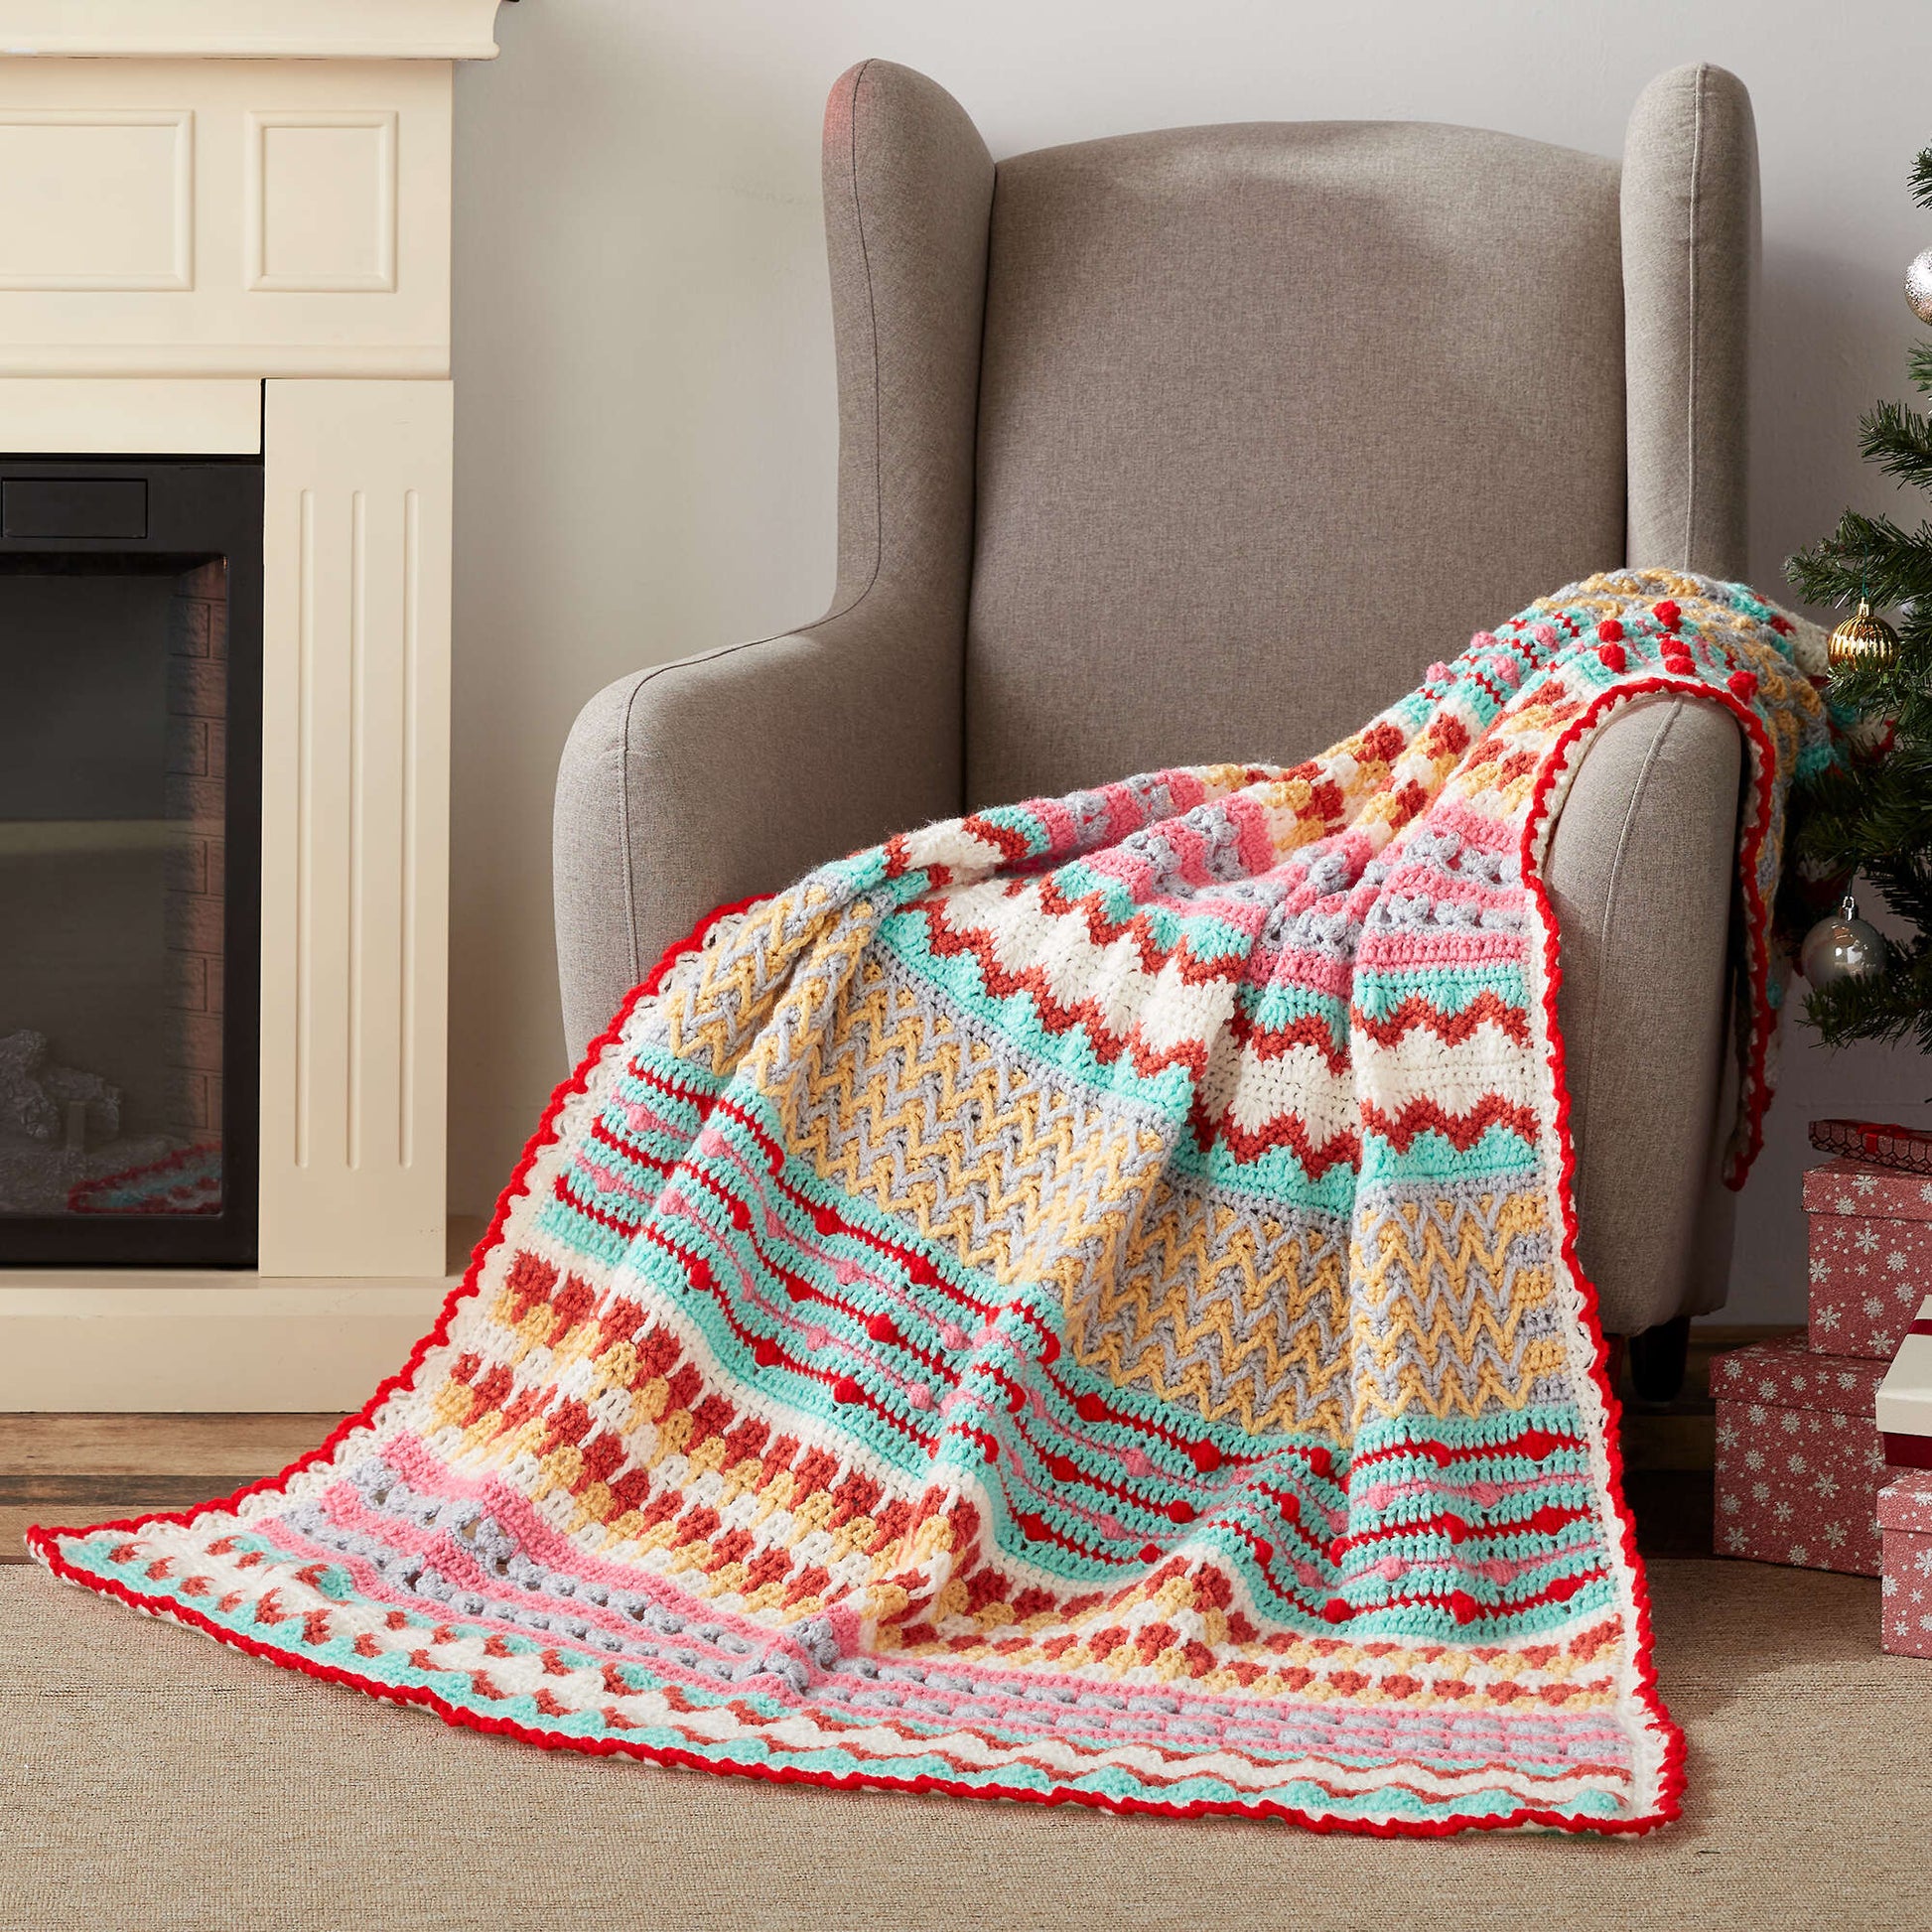 Free Red Heart Happy Holiday Throw Crochet Pattern